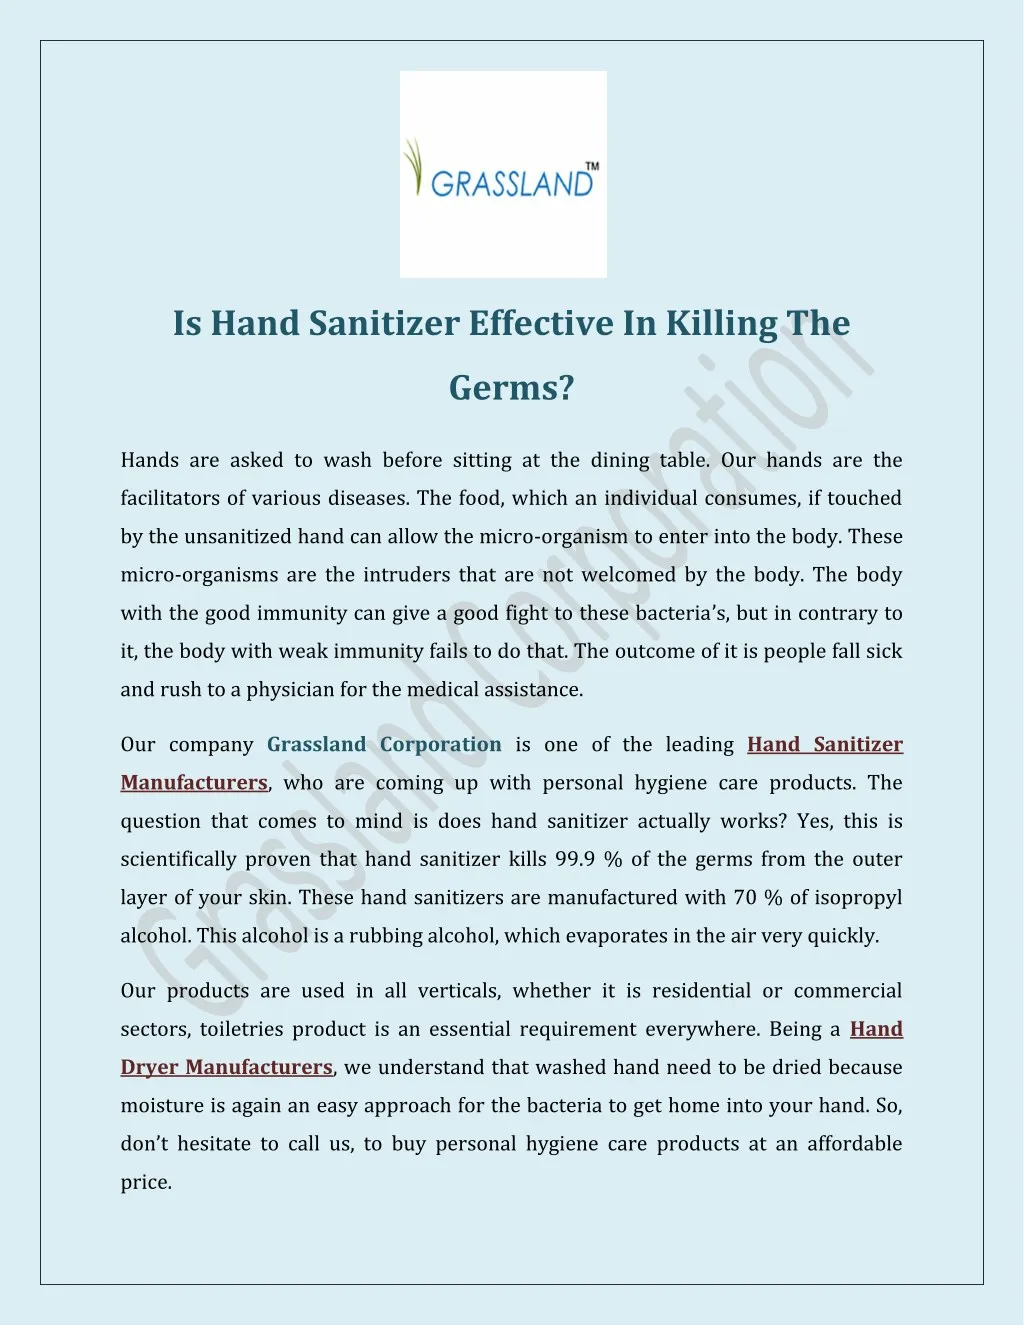 is hand sanitizer effective in killing the